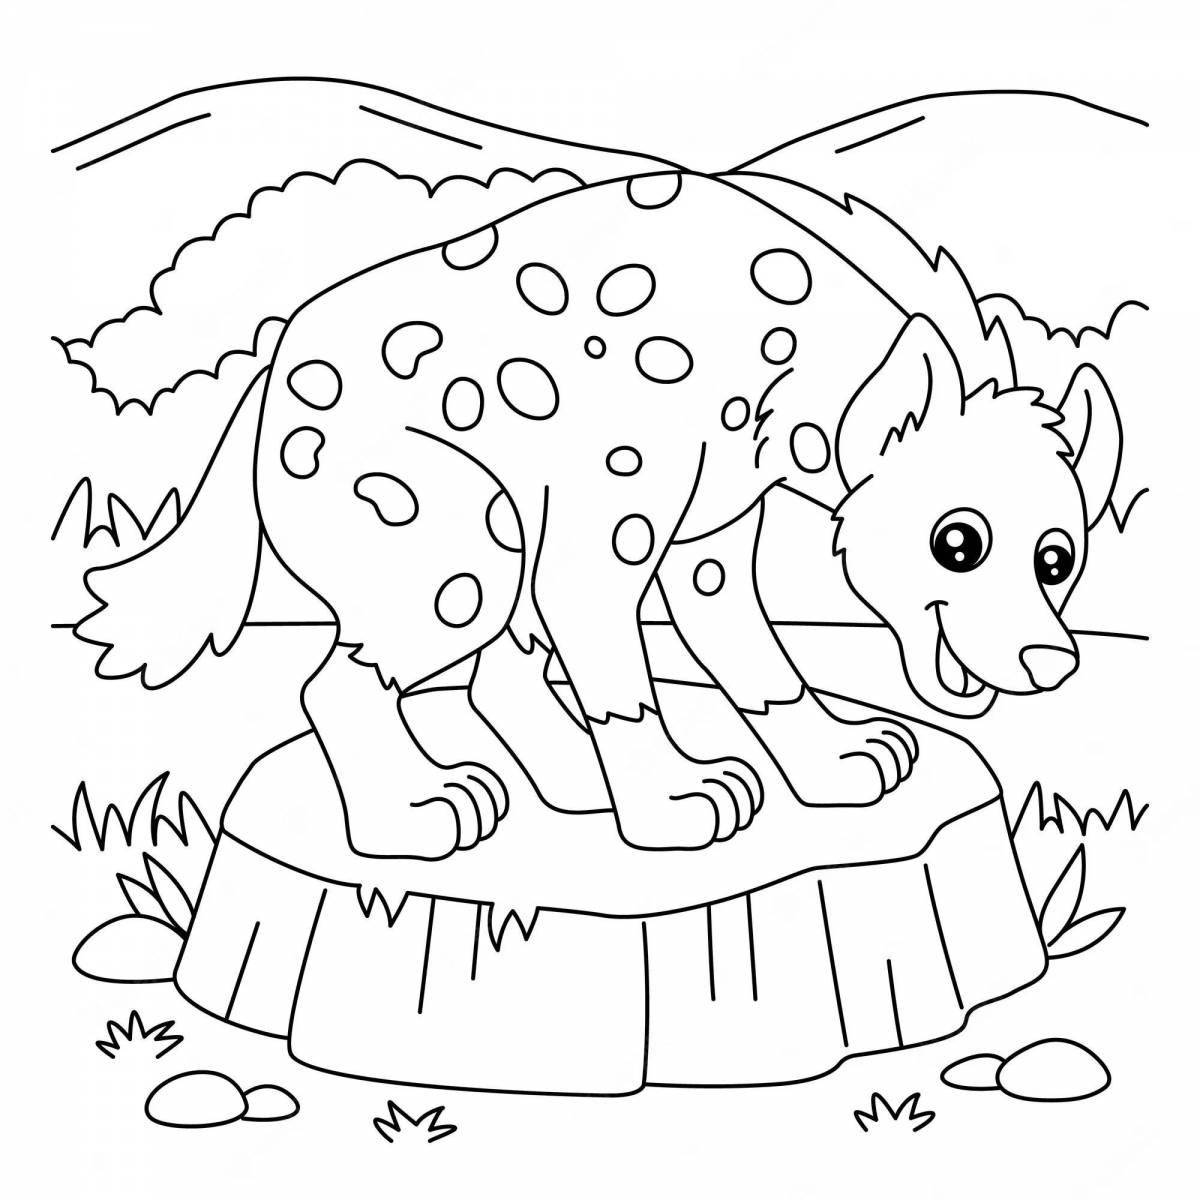 Coloring cute hyena for kids